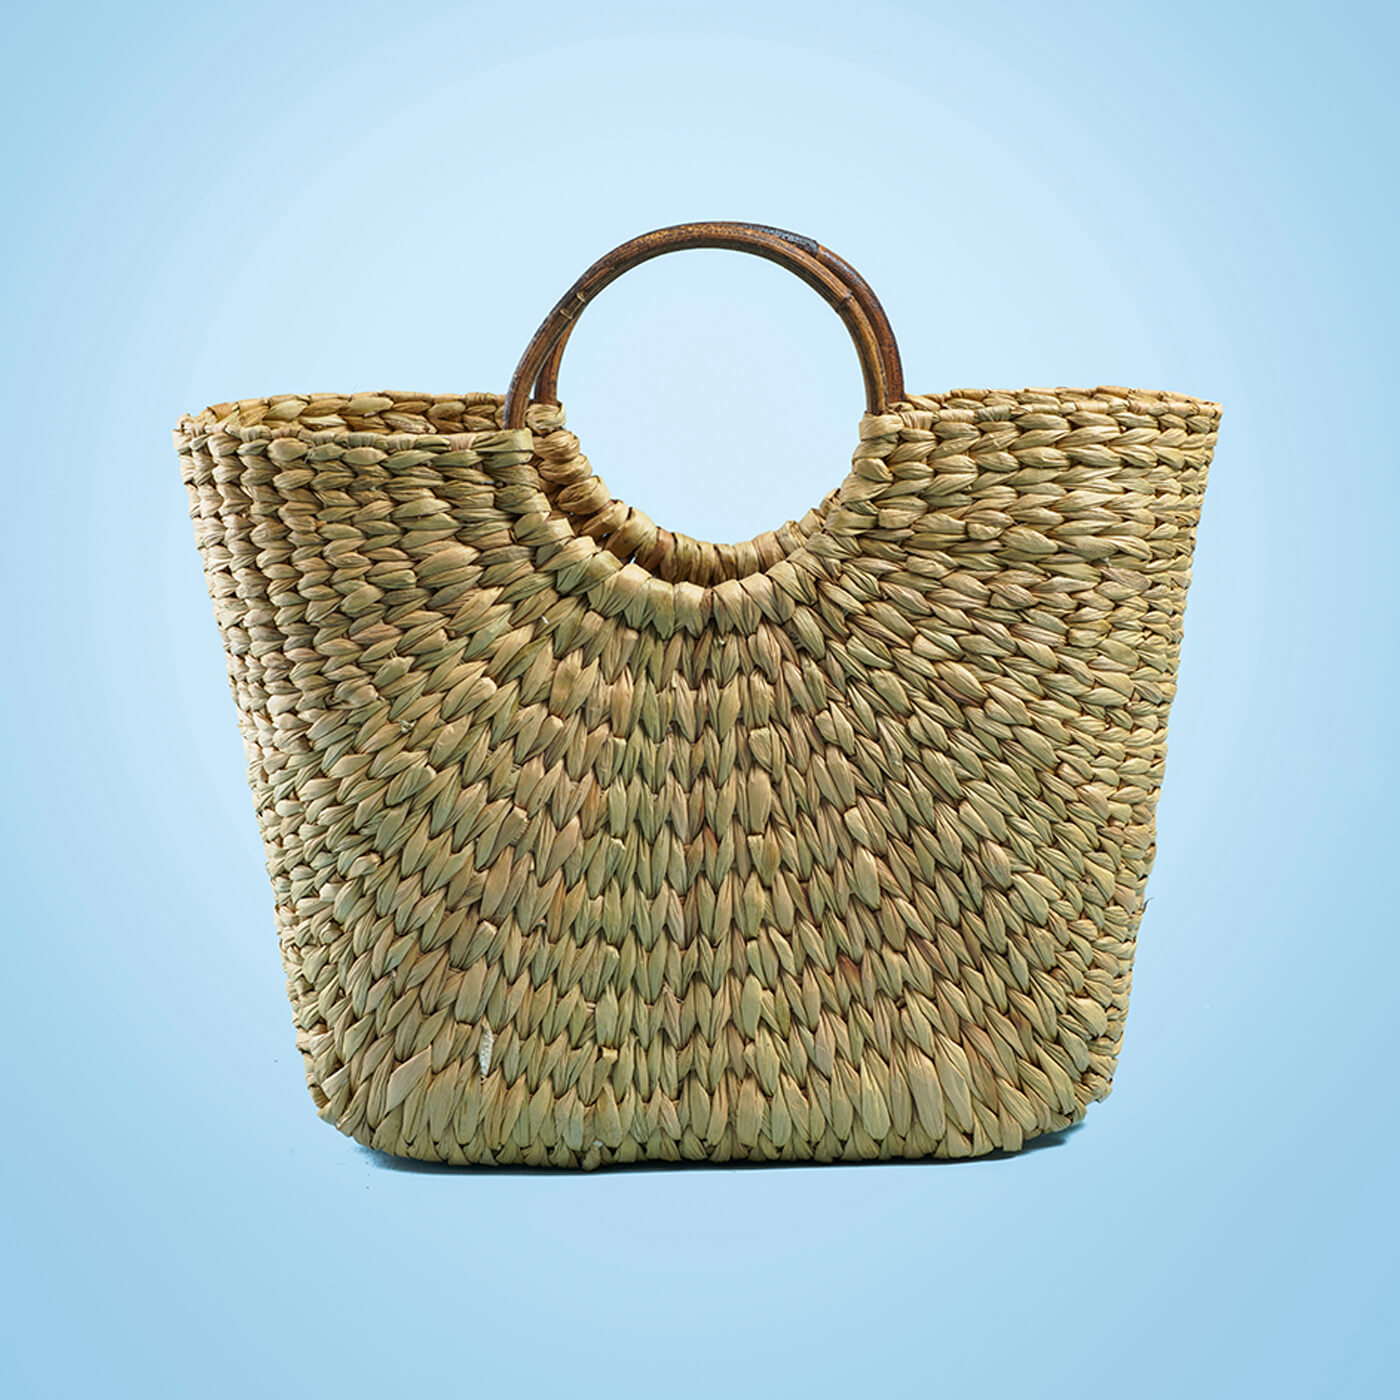 Buy The Assam Admiration Cane/Rattan/Bamboo/Wicker /Leather/Checked/Round/Fashionable/Handmade/Party/Beach/Tote/Beige/Bali/Sling  Bag for women at Amazon.in